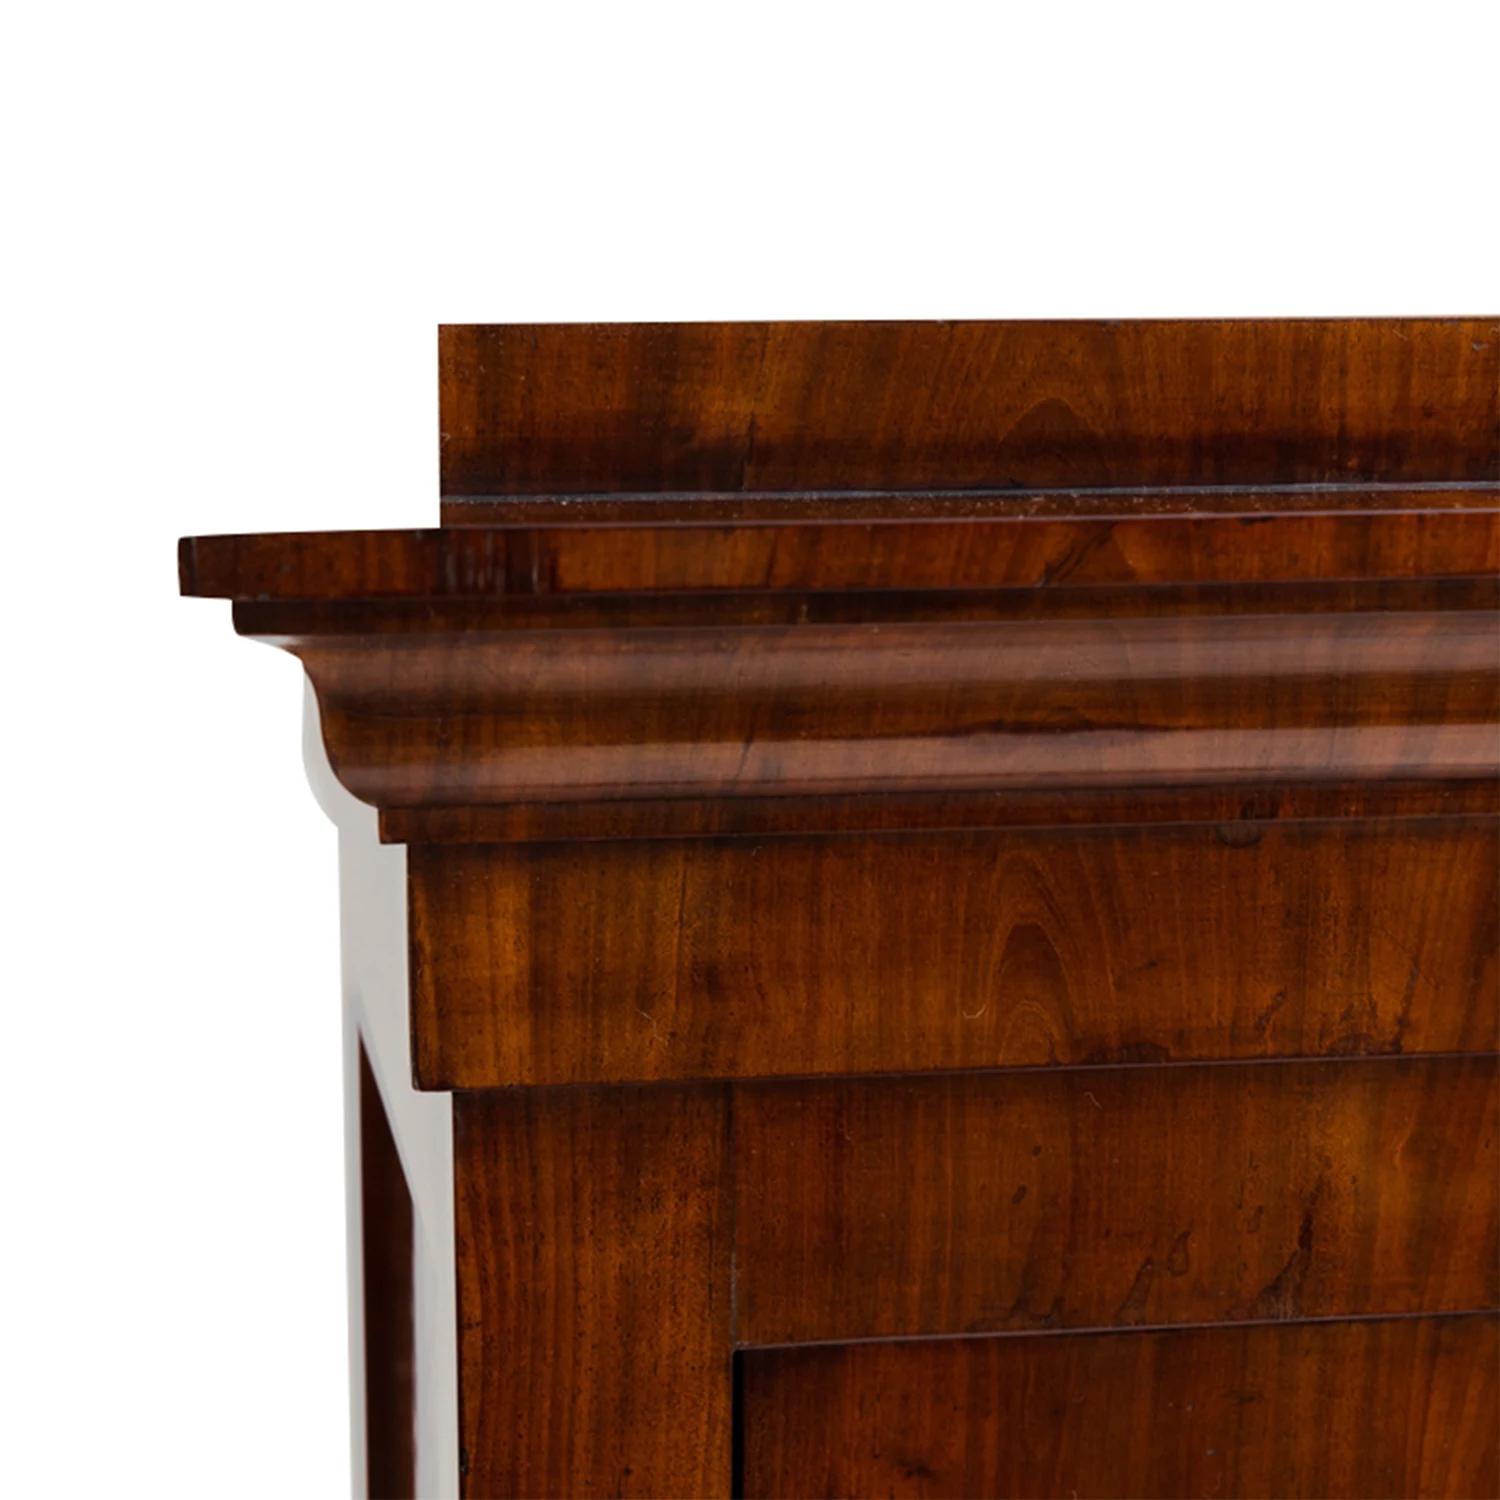 19th Century German Biedermeier Pair of Mahogany Pedestals - Antique Podiums In Good Condition For Sale In West Palm Beach, FL